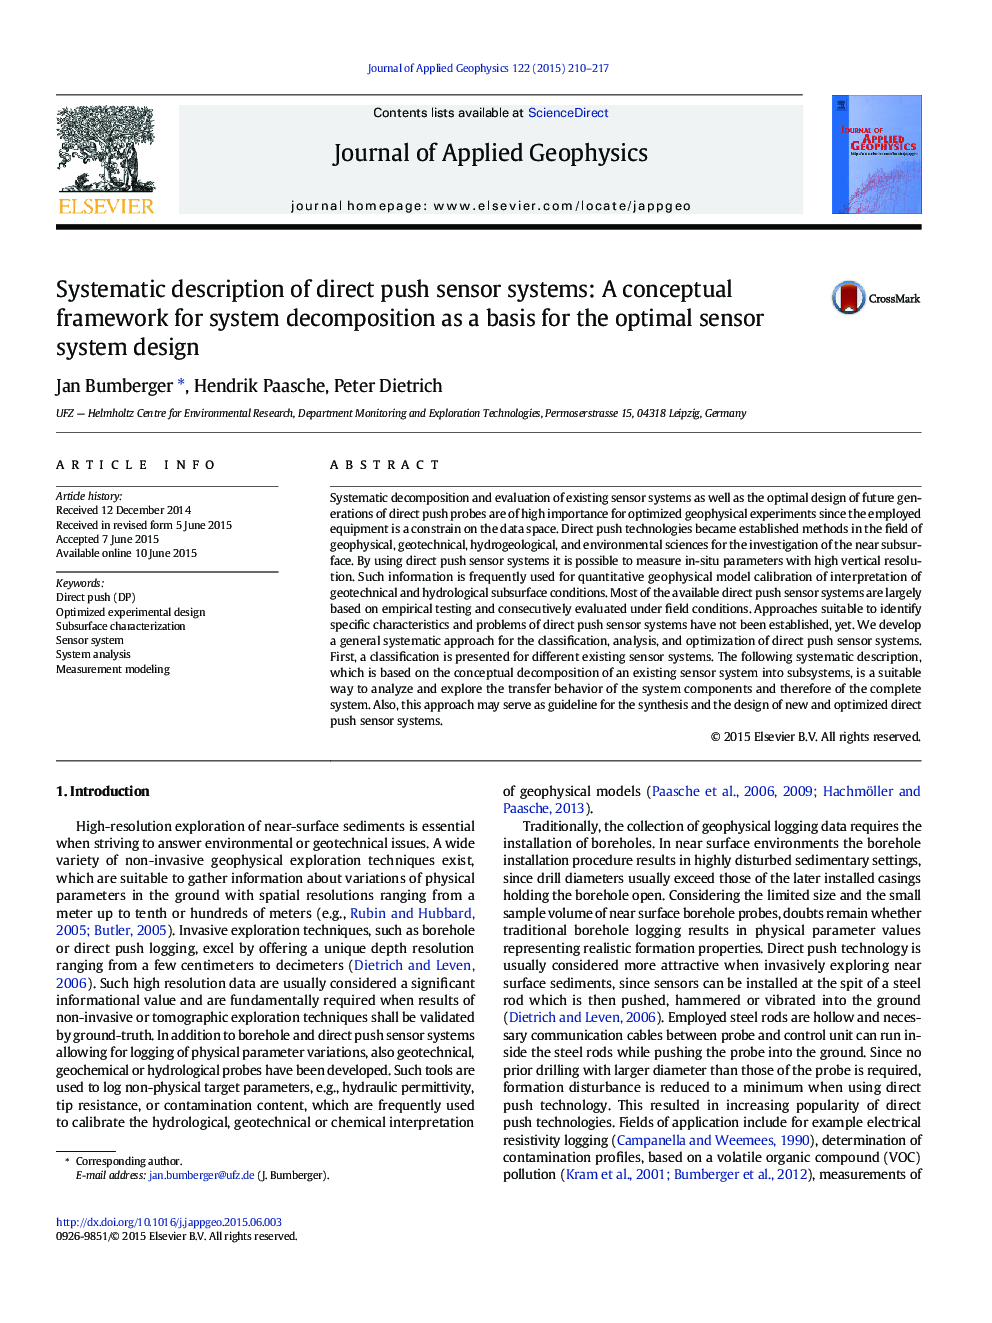 Systematic description of direct push sensor systems: A conceptual framework for system decomposition as a basis for the optimal sensor system design